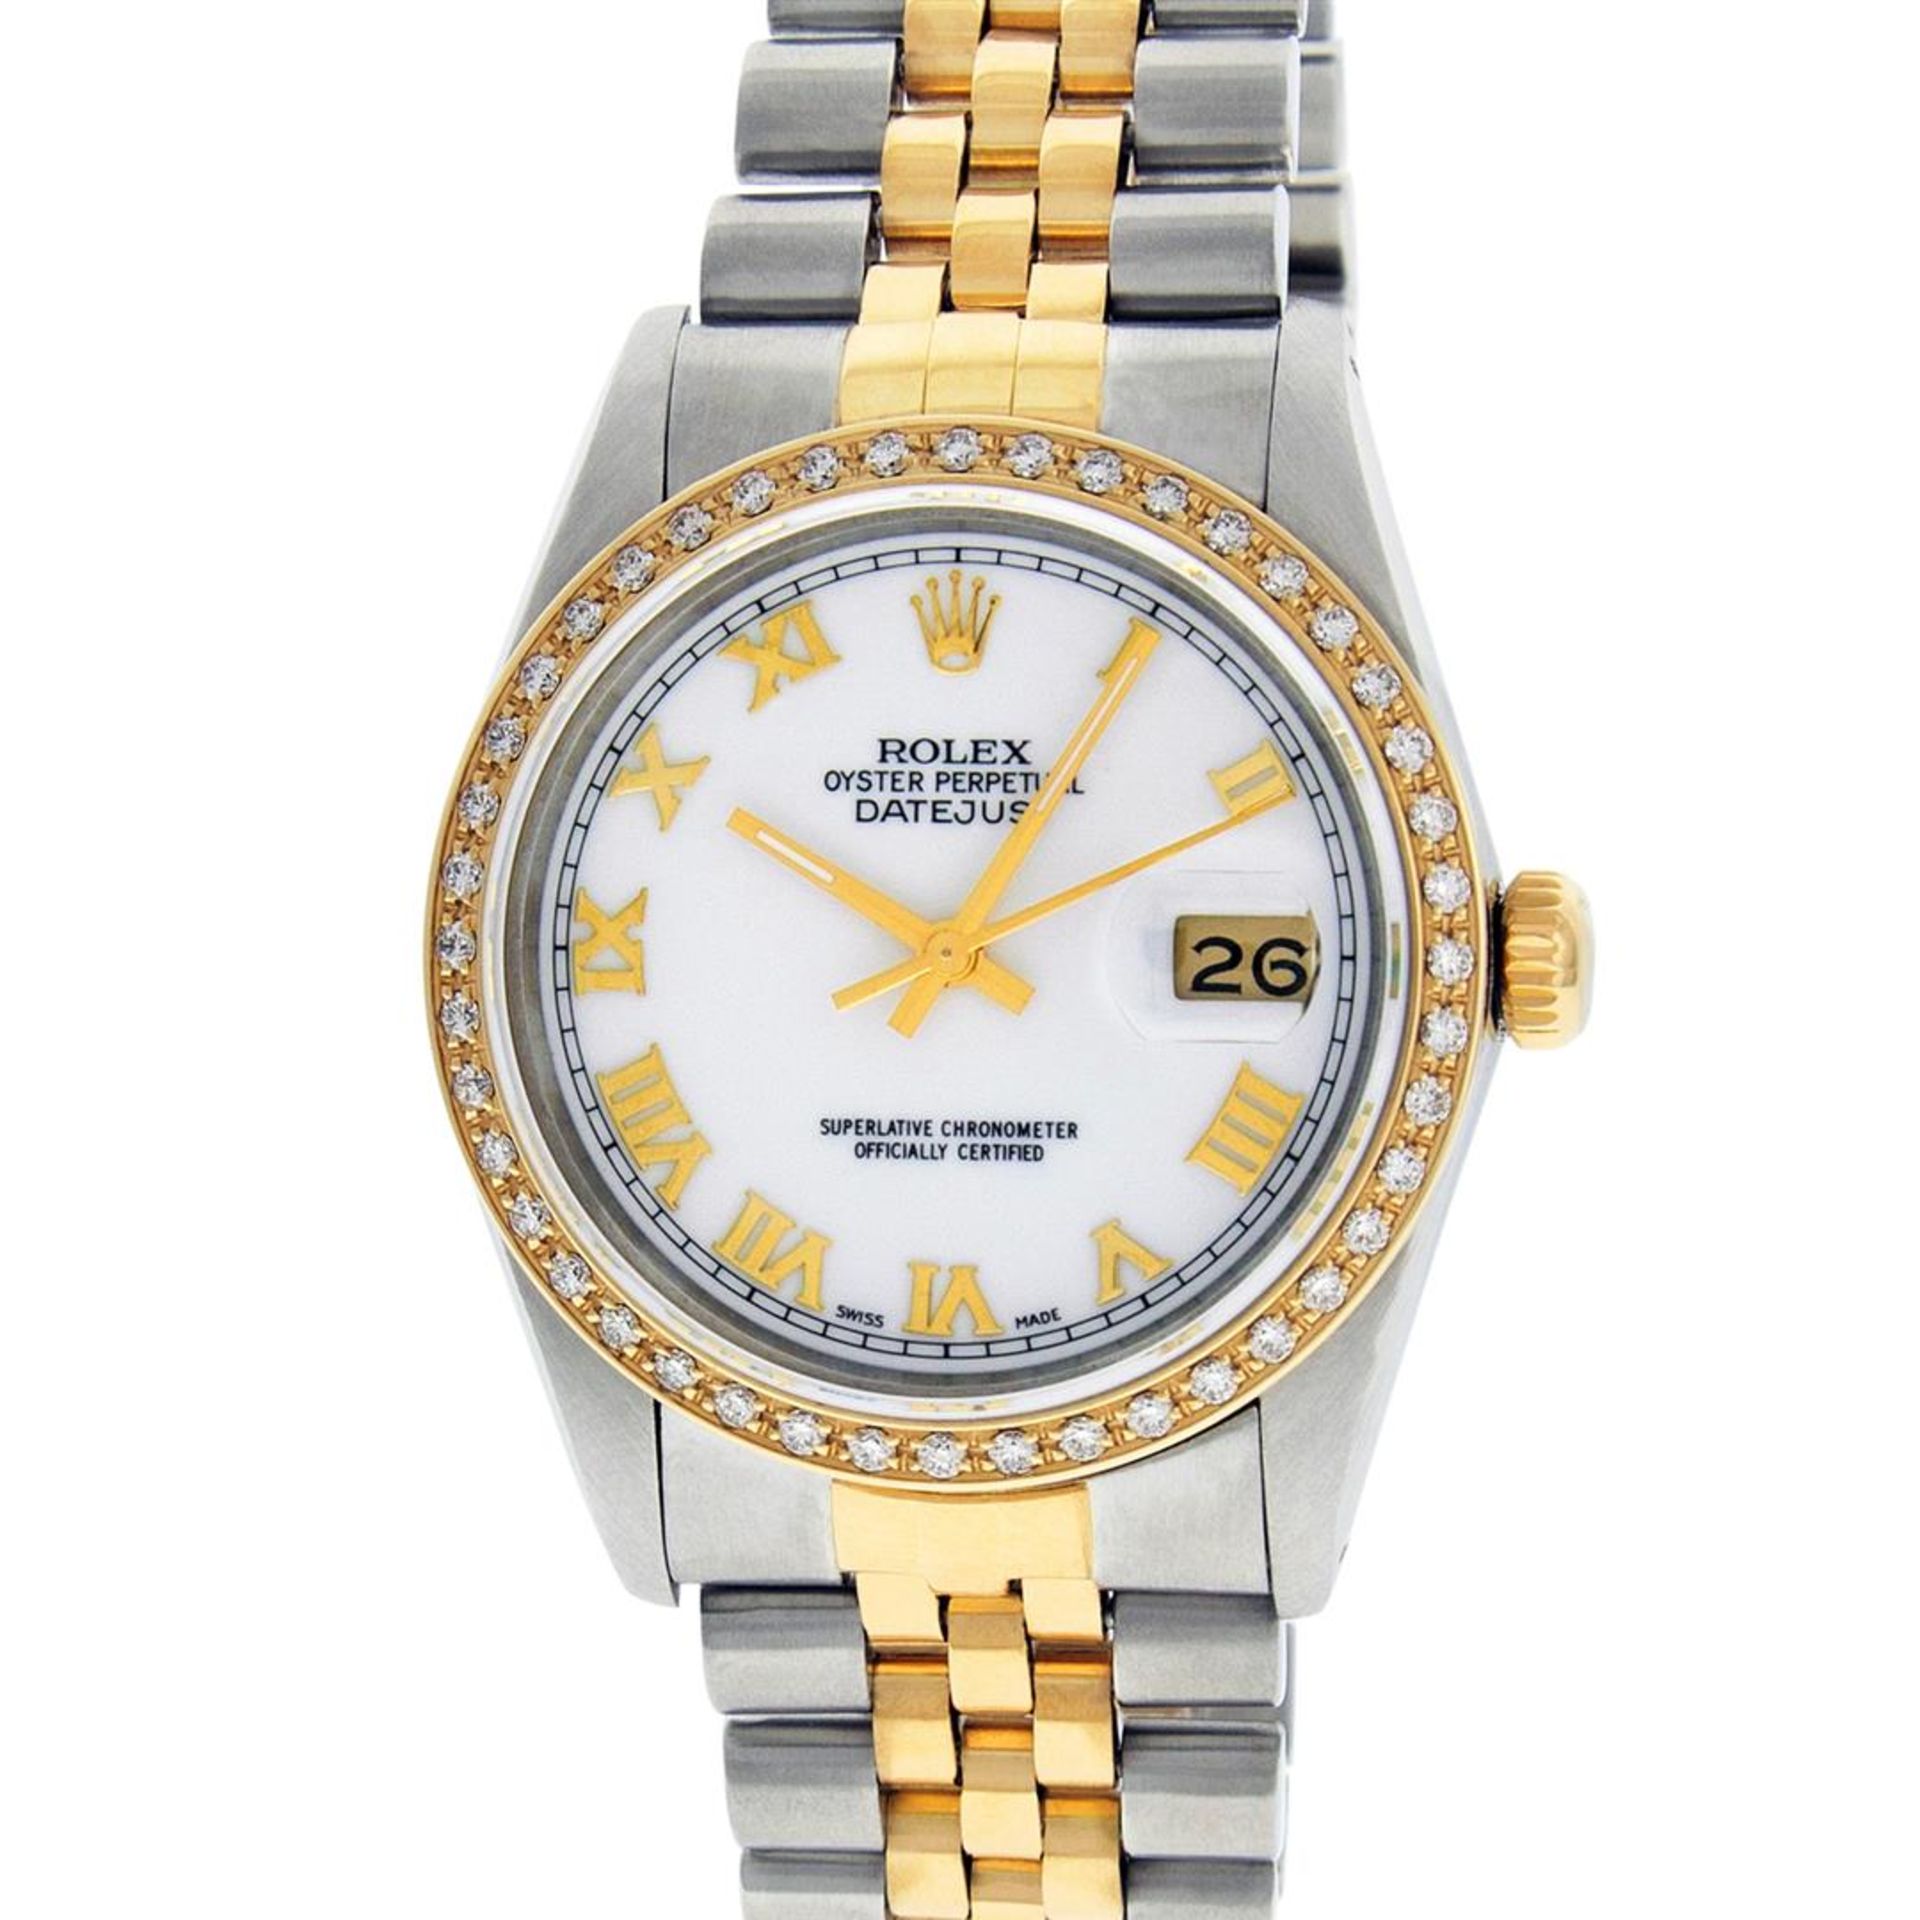 Rolex Mens 2 Tone Mother Of Pearl Diamond 36MM Datejust Wristwatch - Image 3 of 8